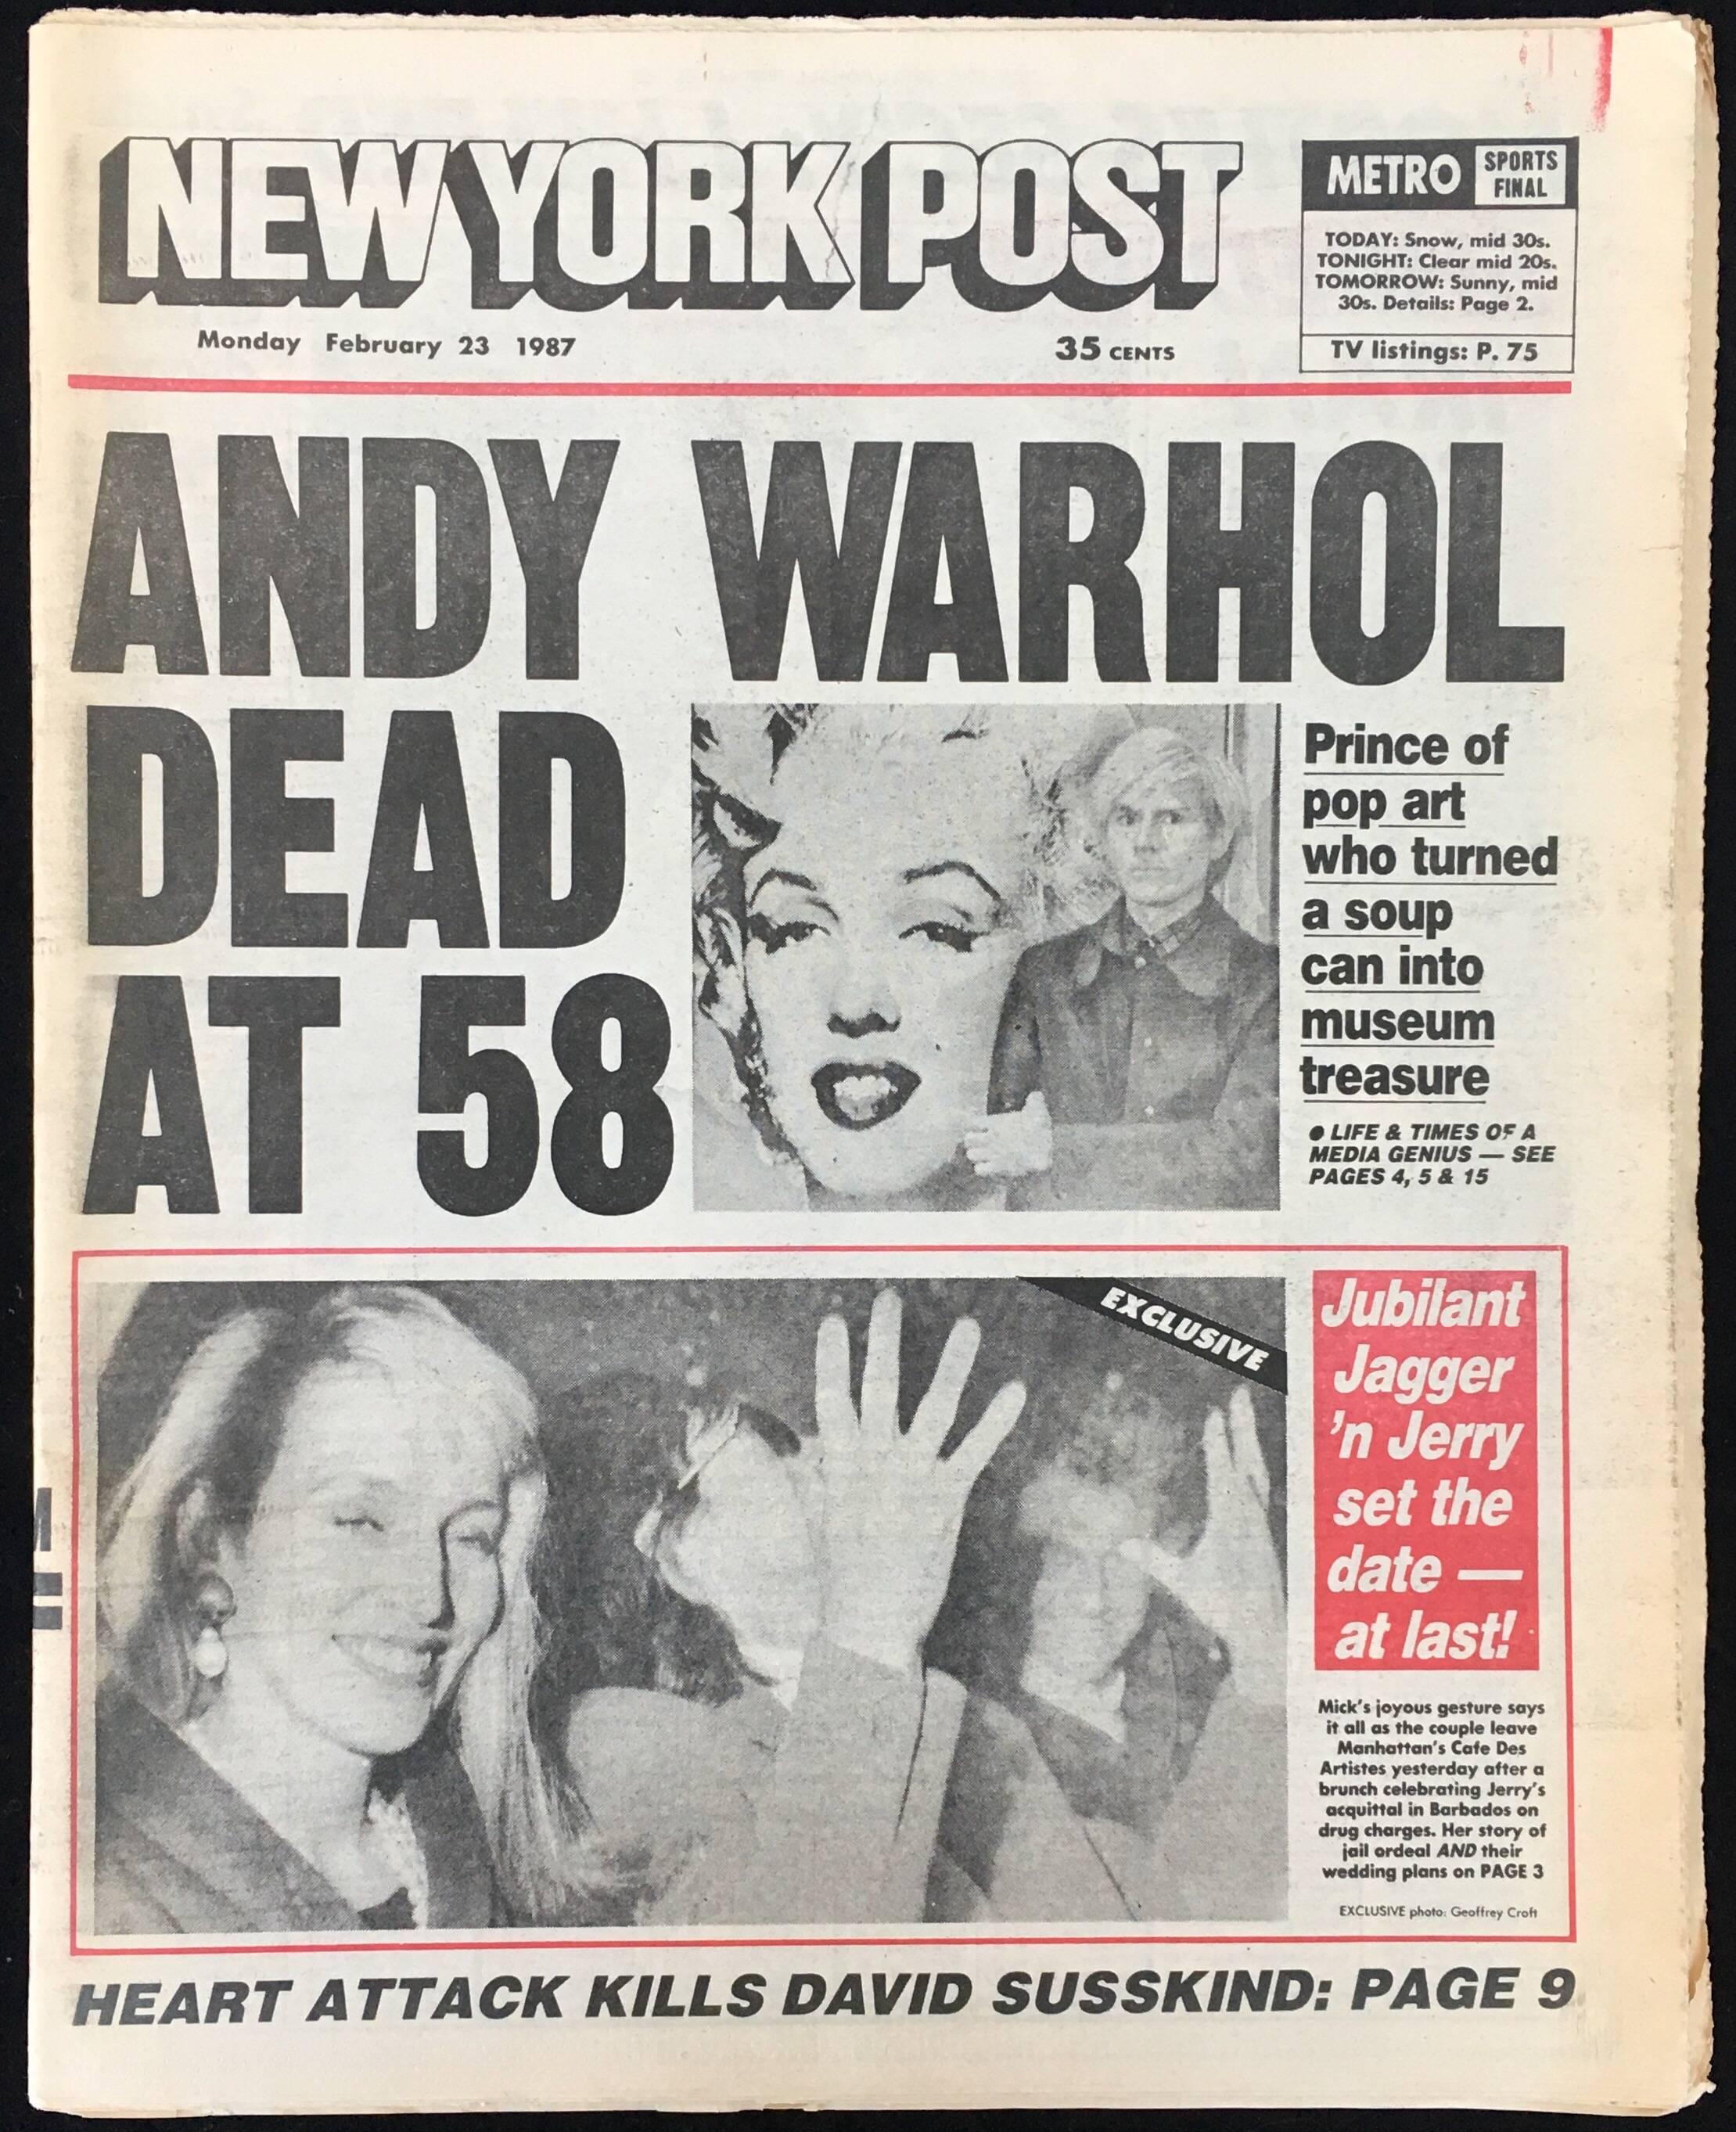 "Andy Warhol Dead at 58" (Warhol death New York Post 1987)  - Art by (after) Andy Warhol